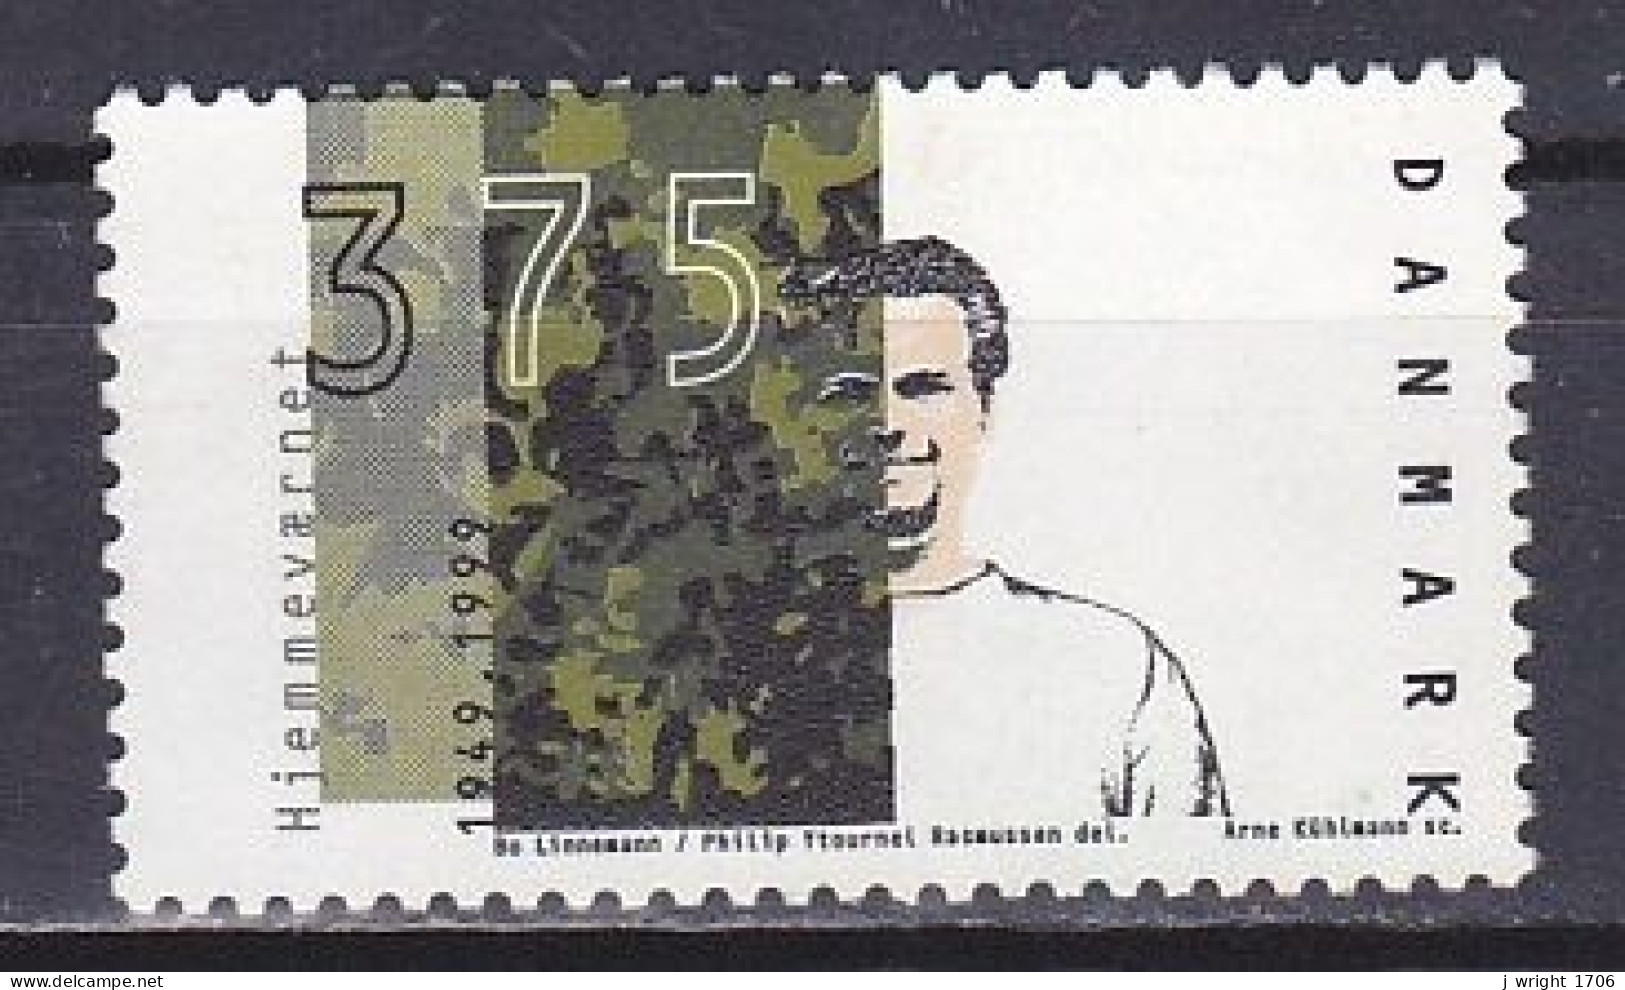 Denmark, 1999, Home Guard 50th Anniv, 3.75kr, USED - Used Stamps